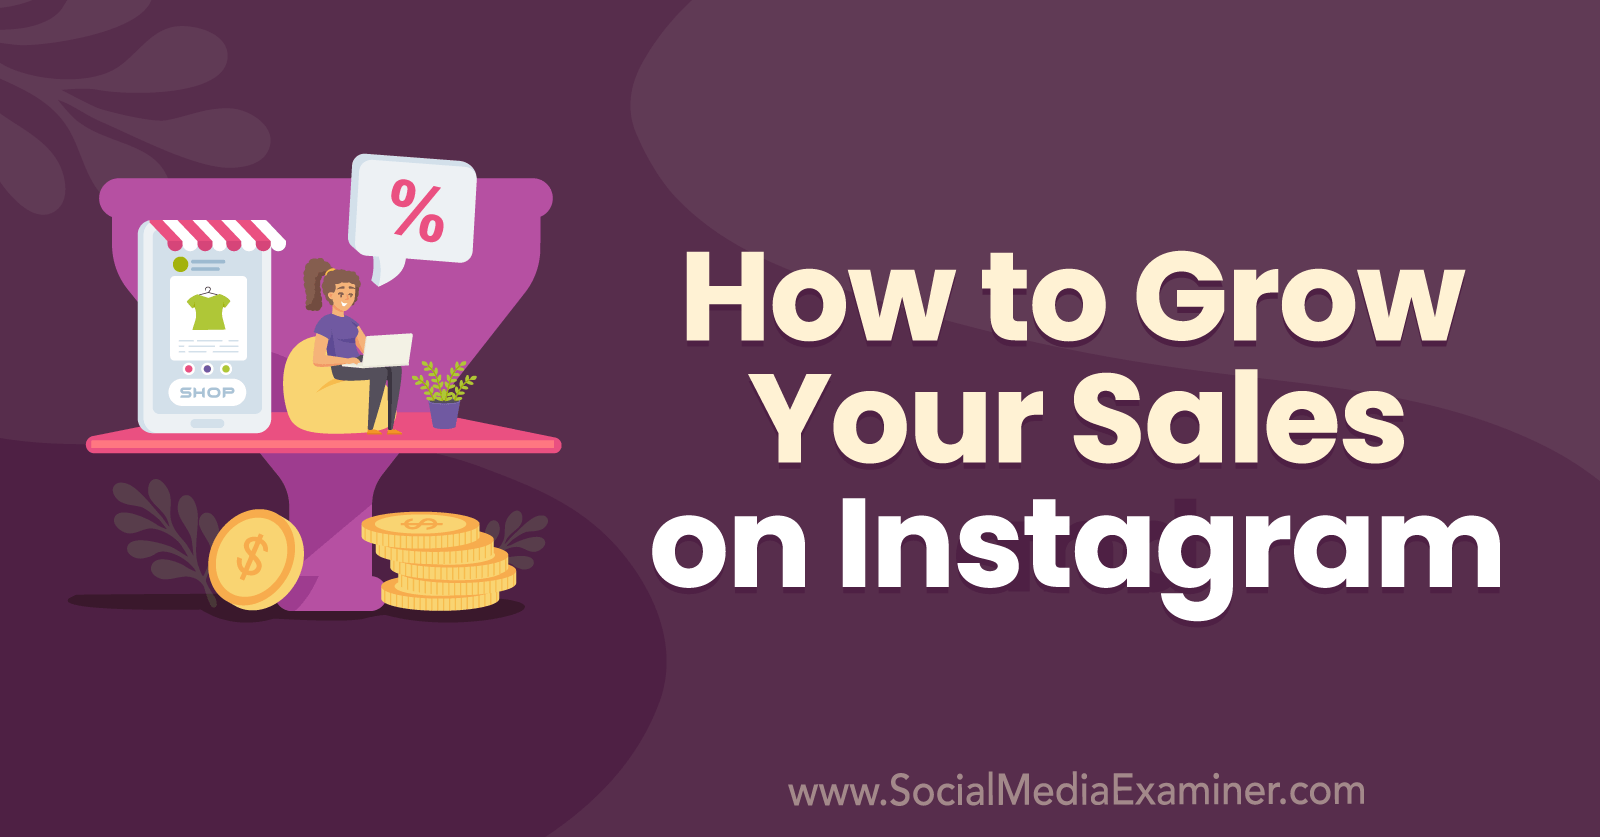 How to Grow Your Sales on Instagram by Social Media Examiner